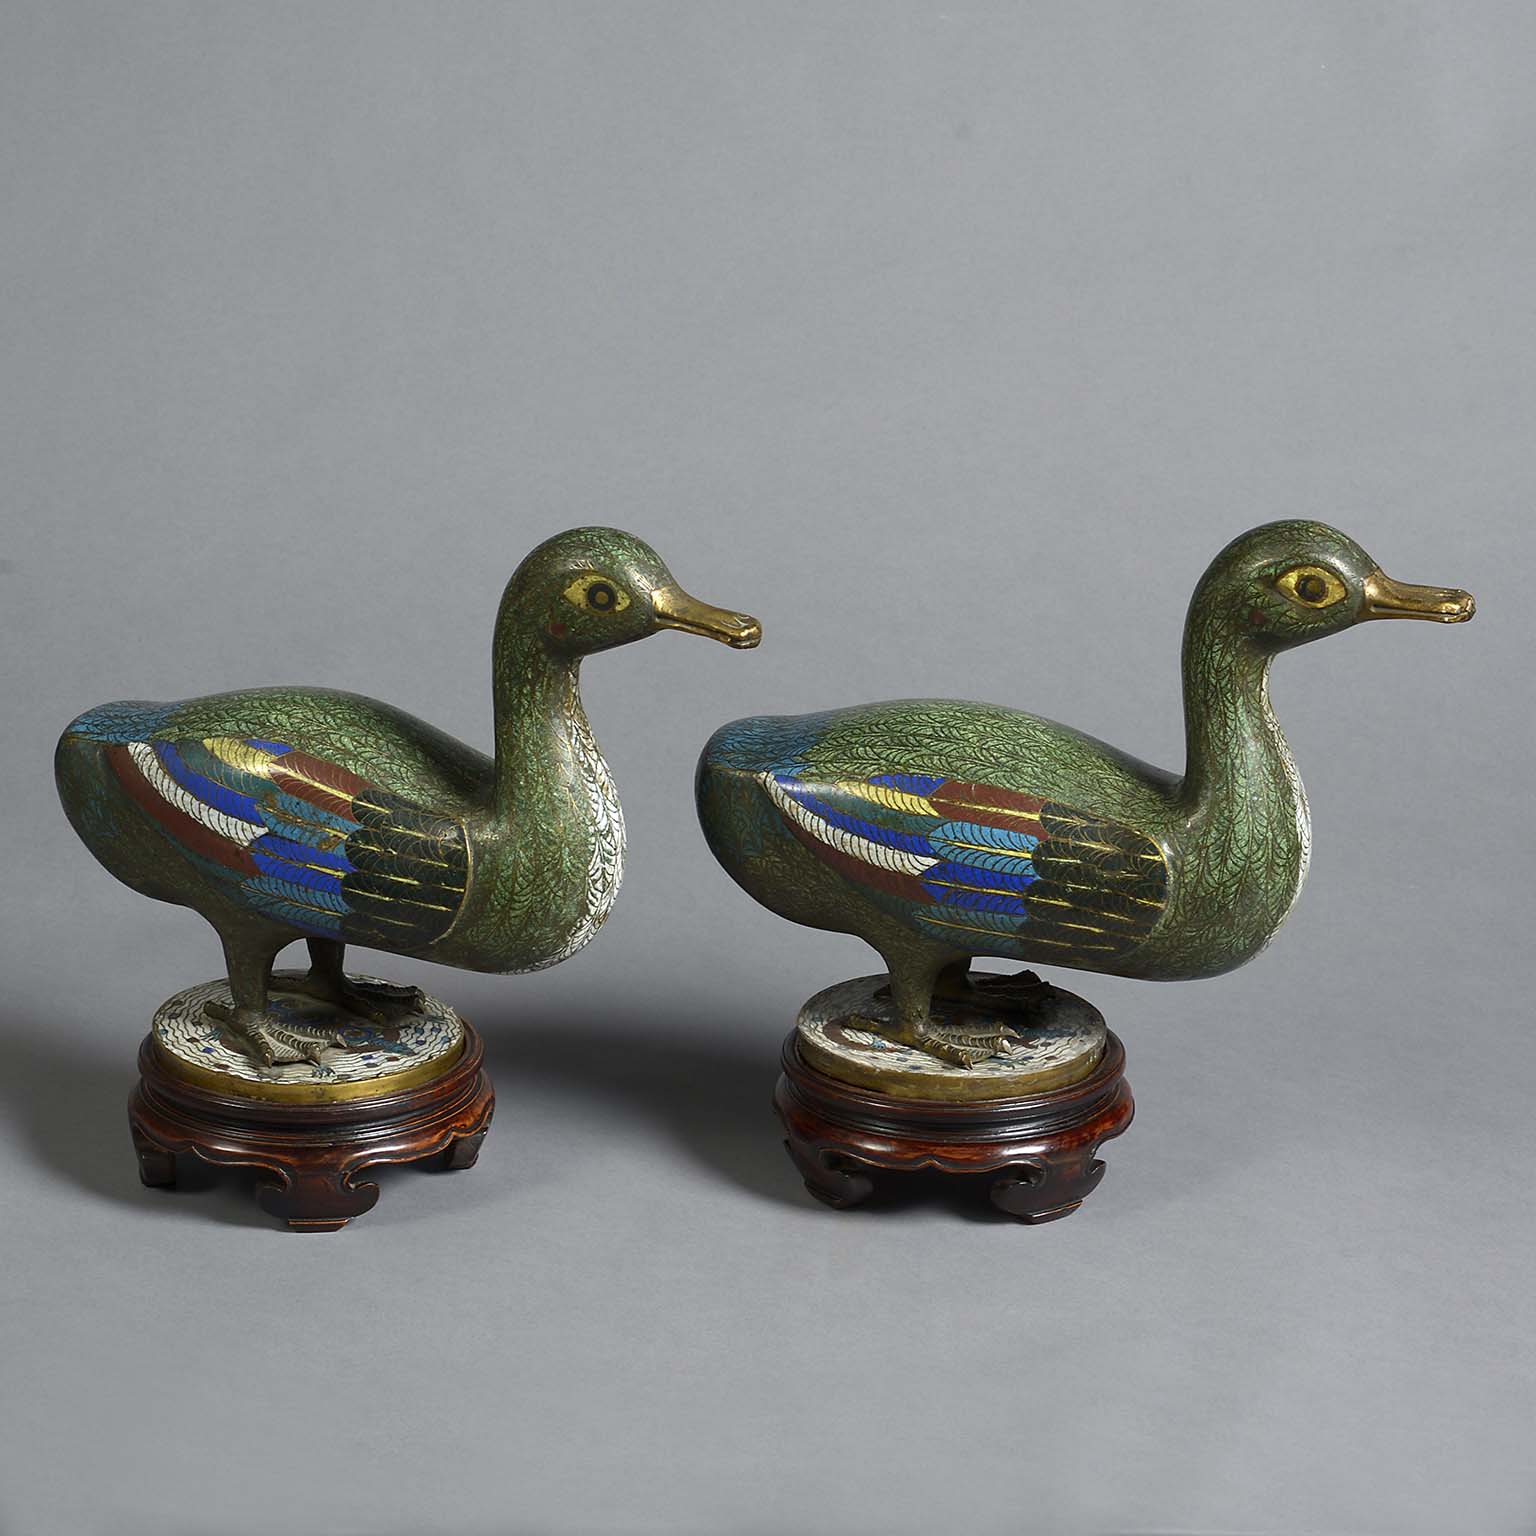 Pair of Chinese Cloisonne Ducks